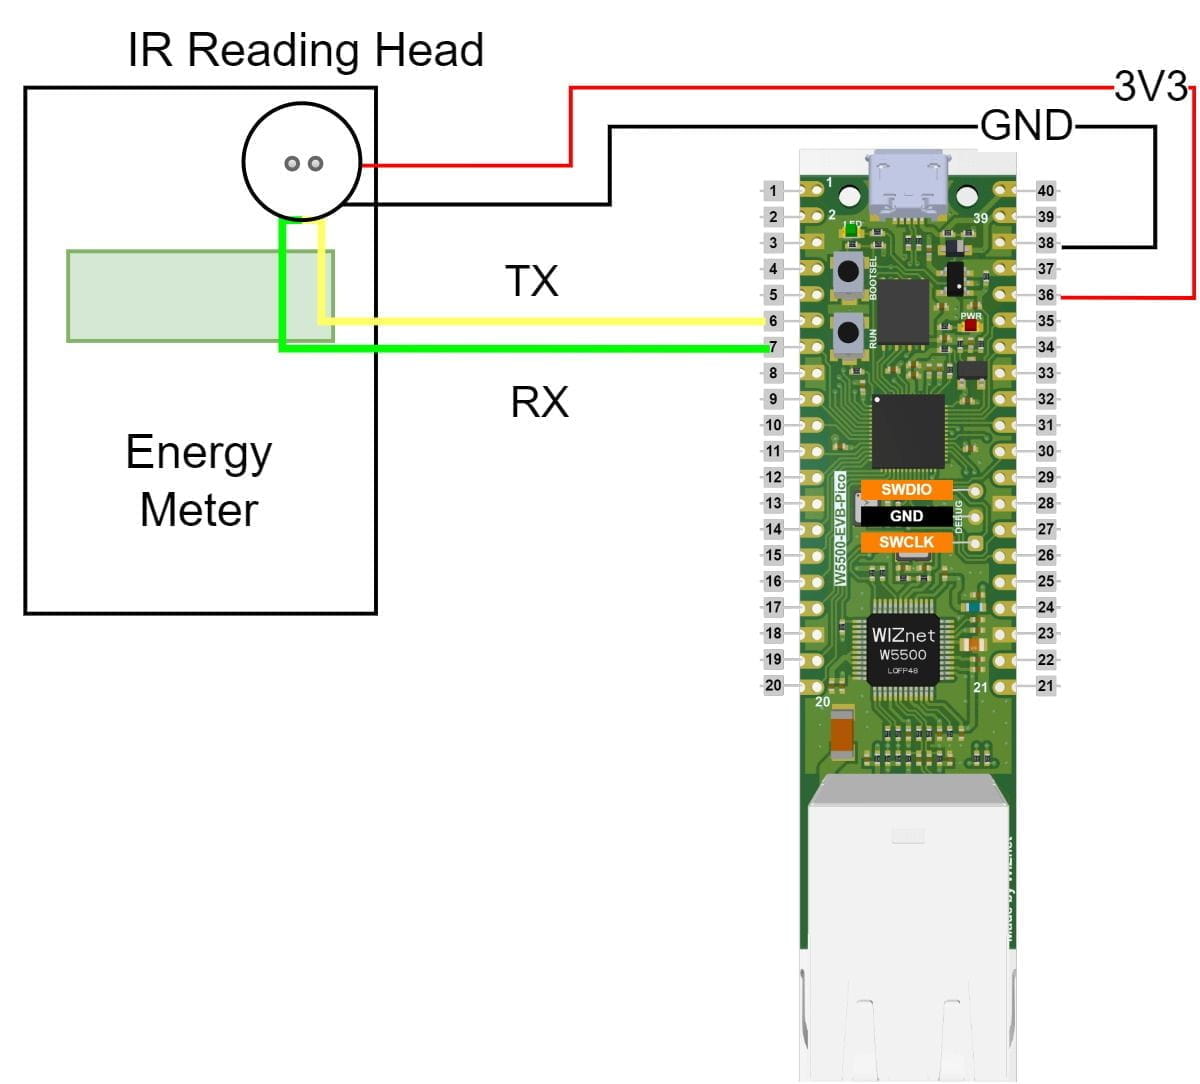 A setup of the project, showing the connection between the W5500-EVB-Pico and the IR reading head, which reads the electricity meter.